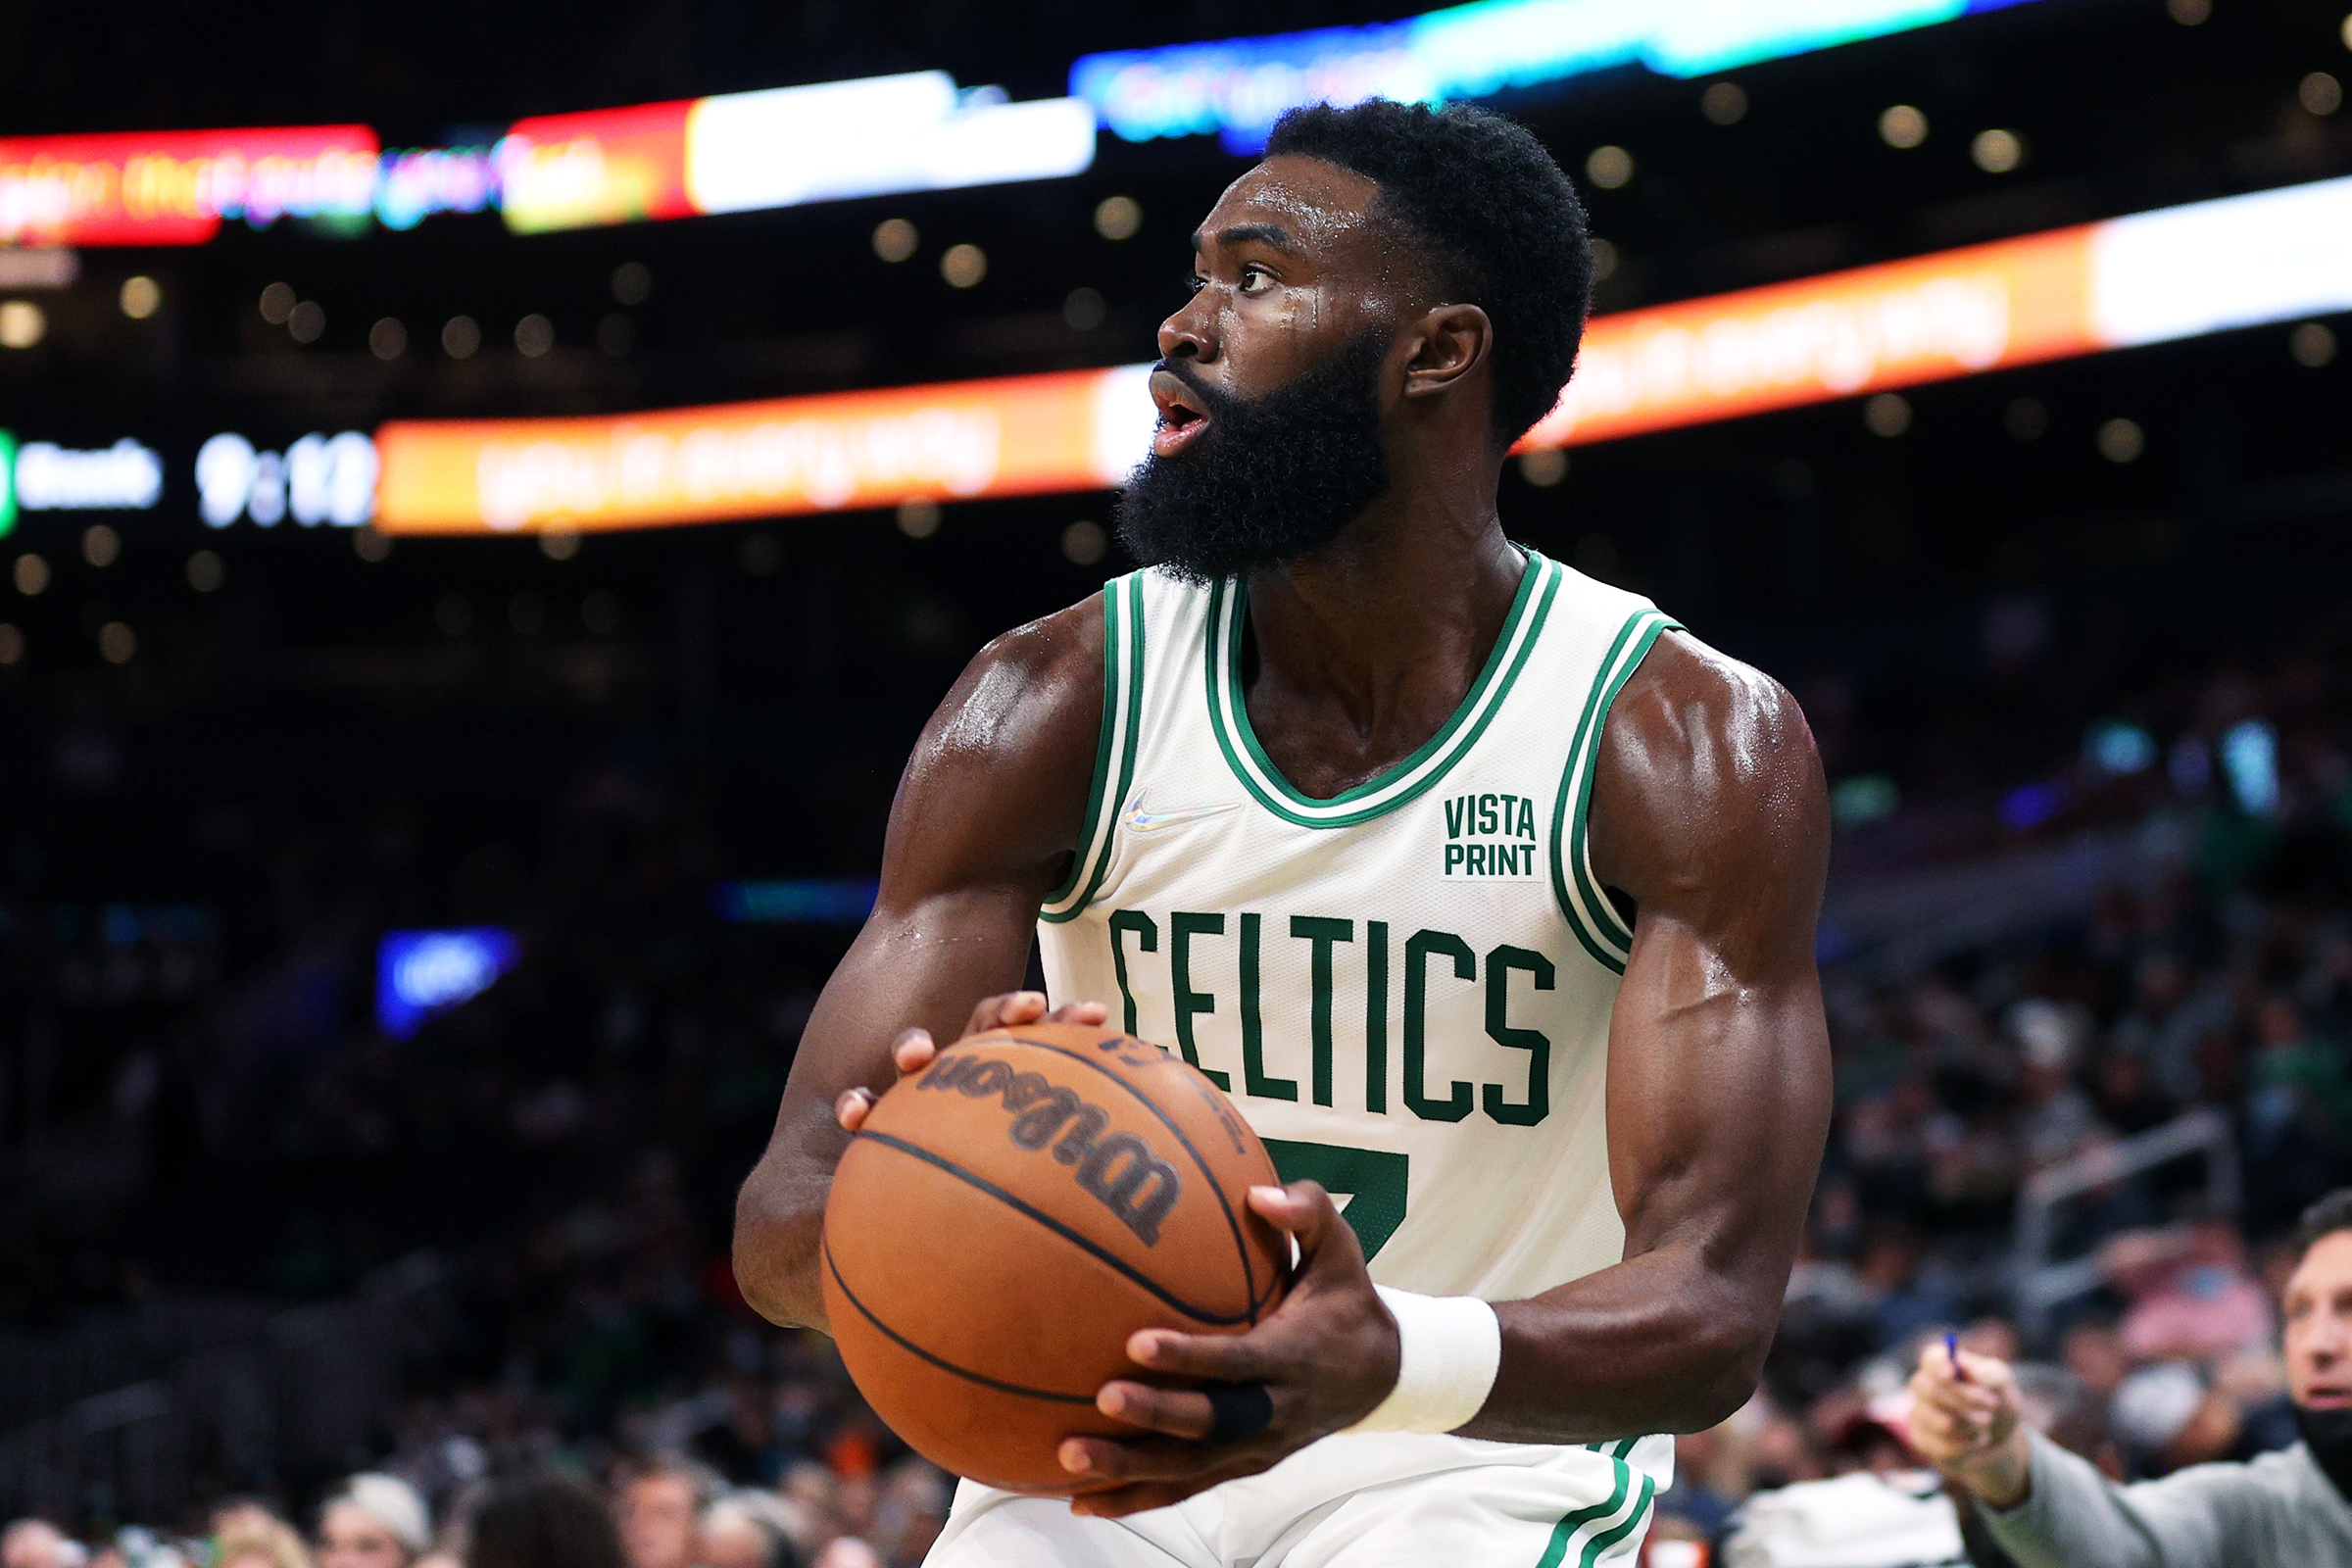 Jaylen Brown #7 of the Boston Celtics looks for a shot against the Orlando Magic during the second half of the preseason game at TD Garden on October 04, 2021 in Boston, Massachusetts